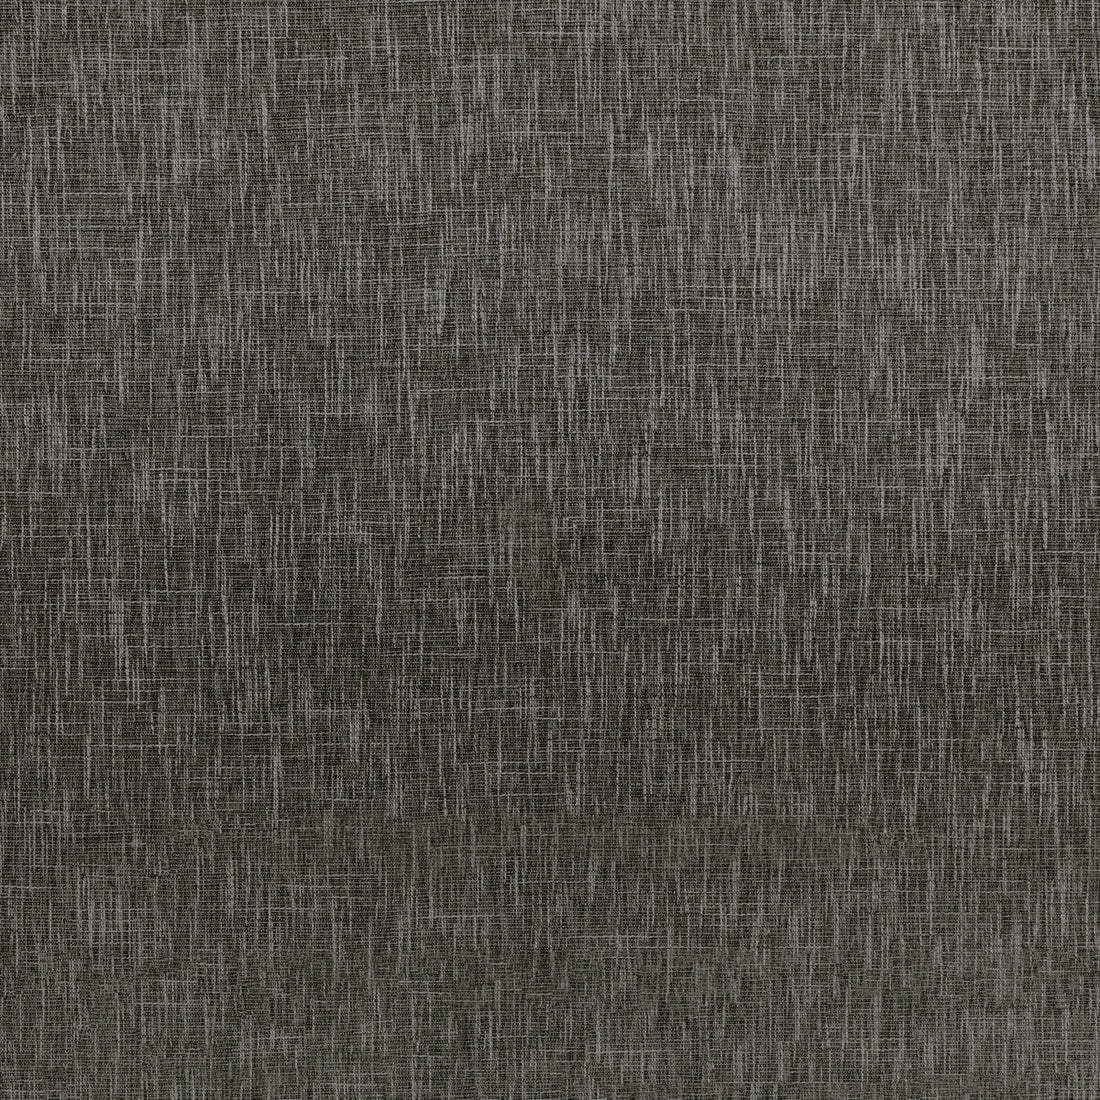 Maris fabric in graphite color - pattern 35923.21.0 - by Kravet Basics in the Monterey collection